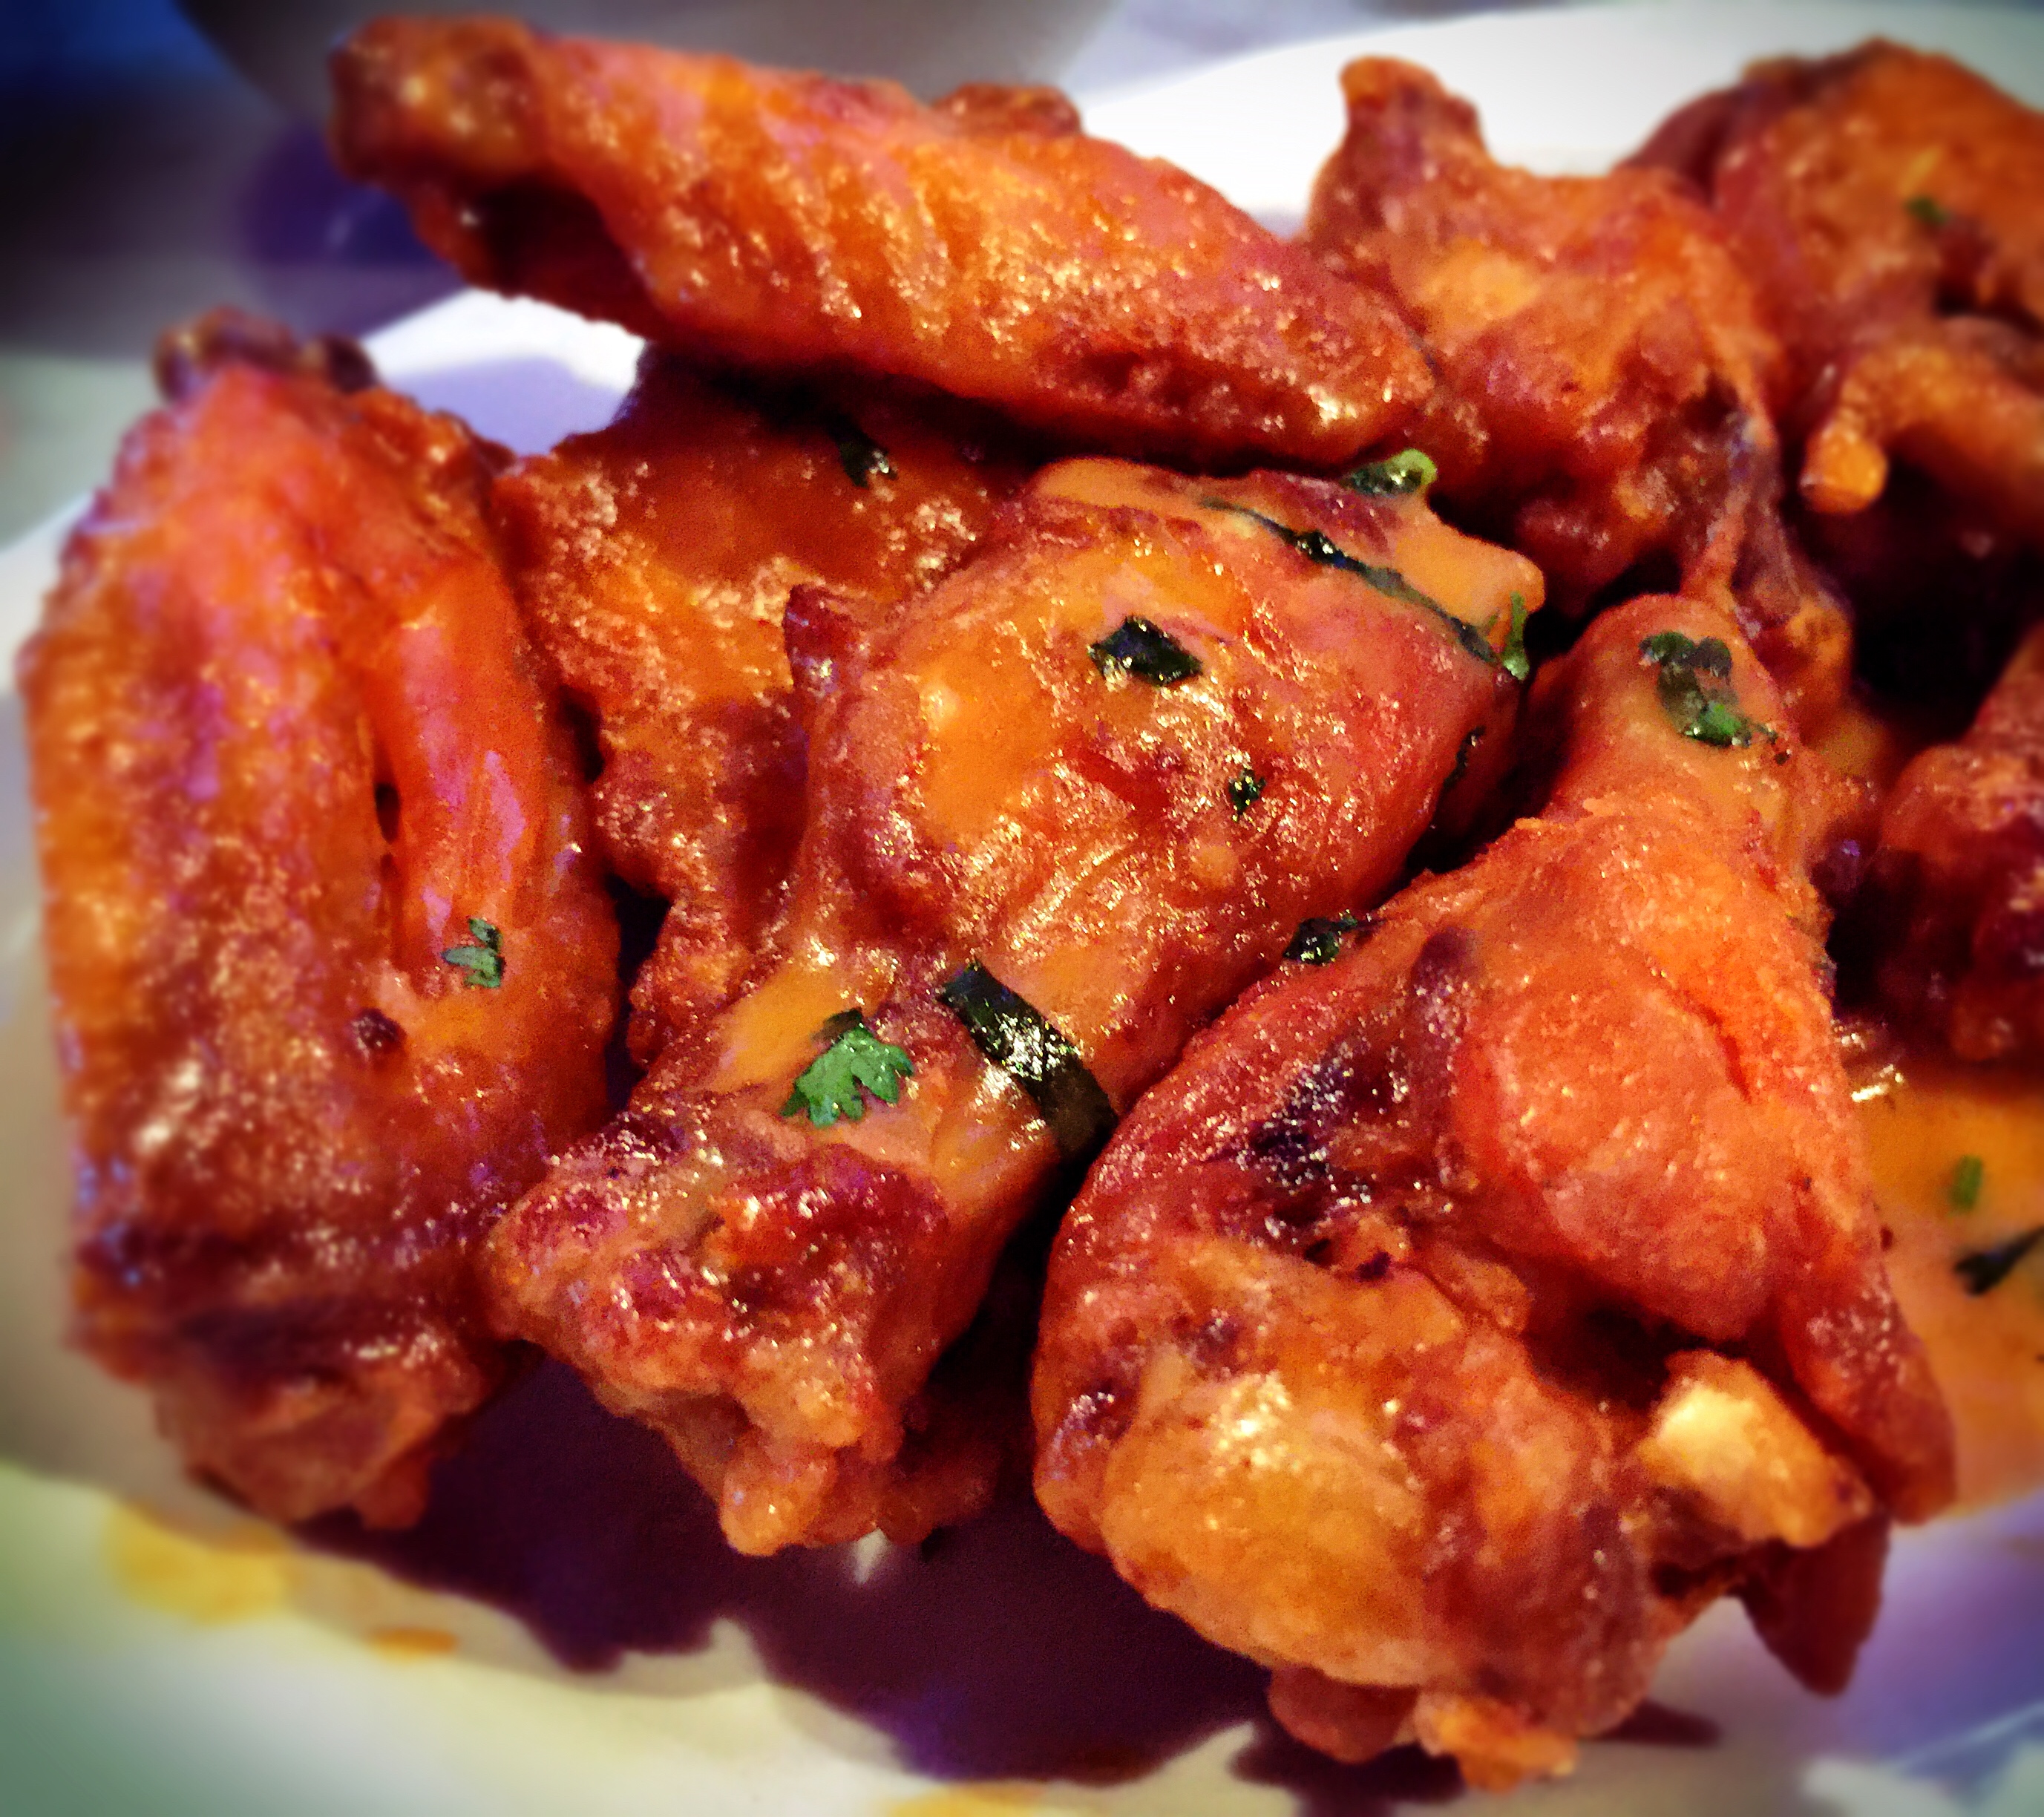 5 New Chicken Wing Flavors That Will Rock Your Face | HuffPost